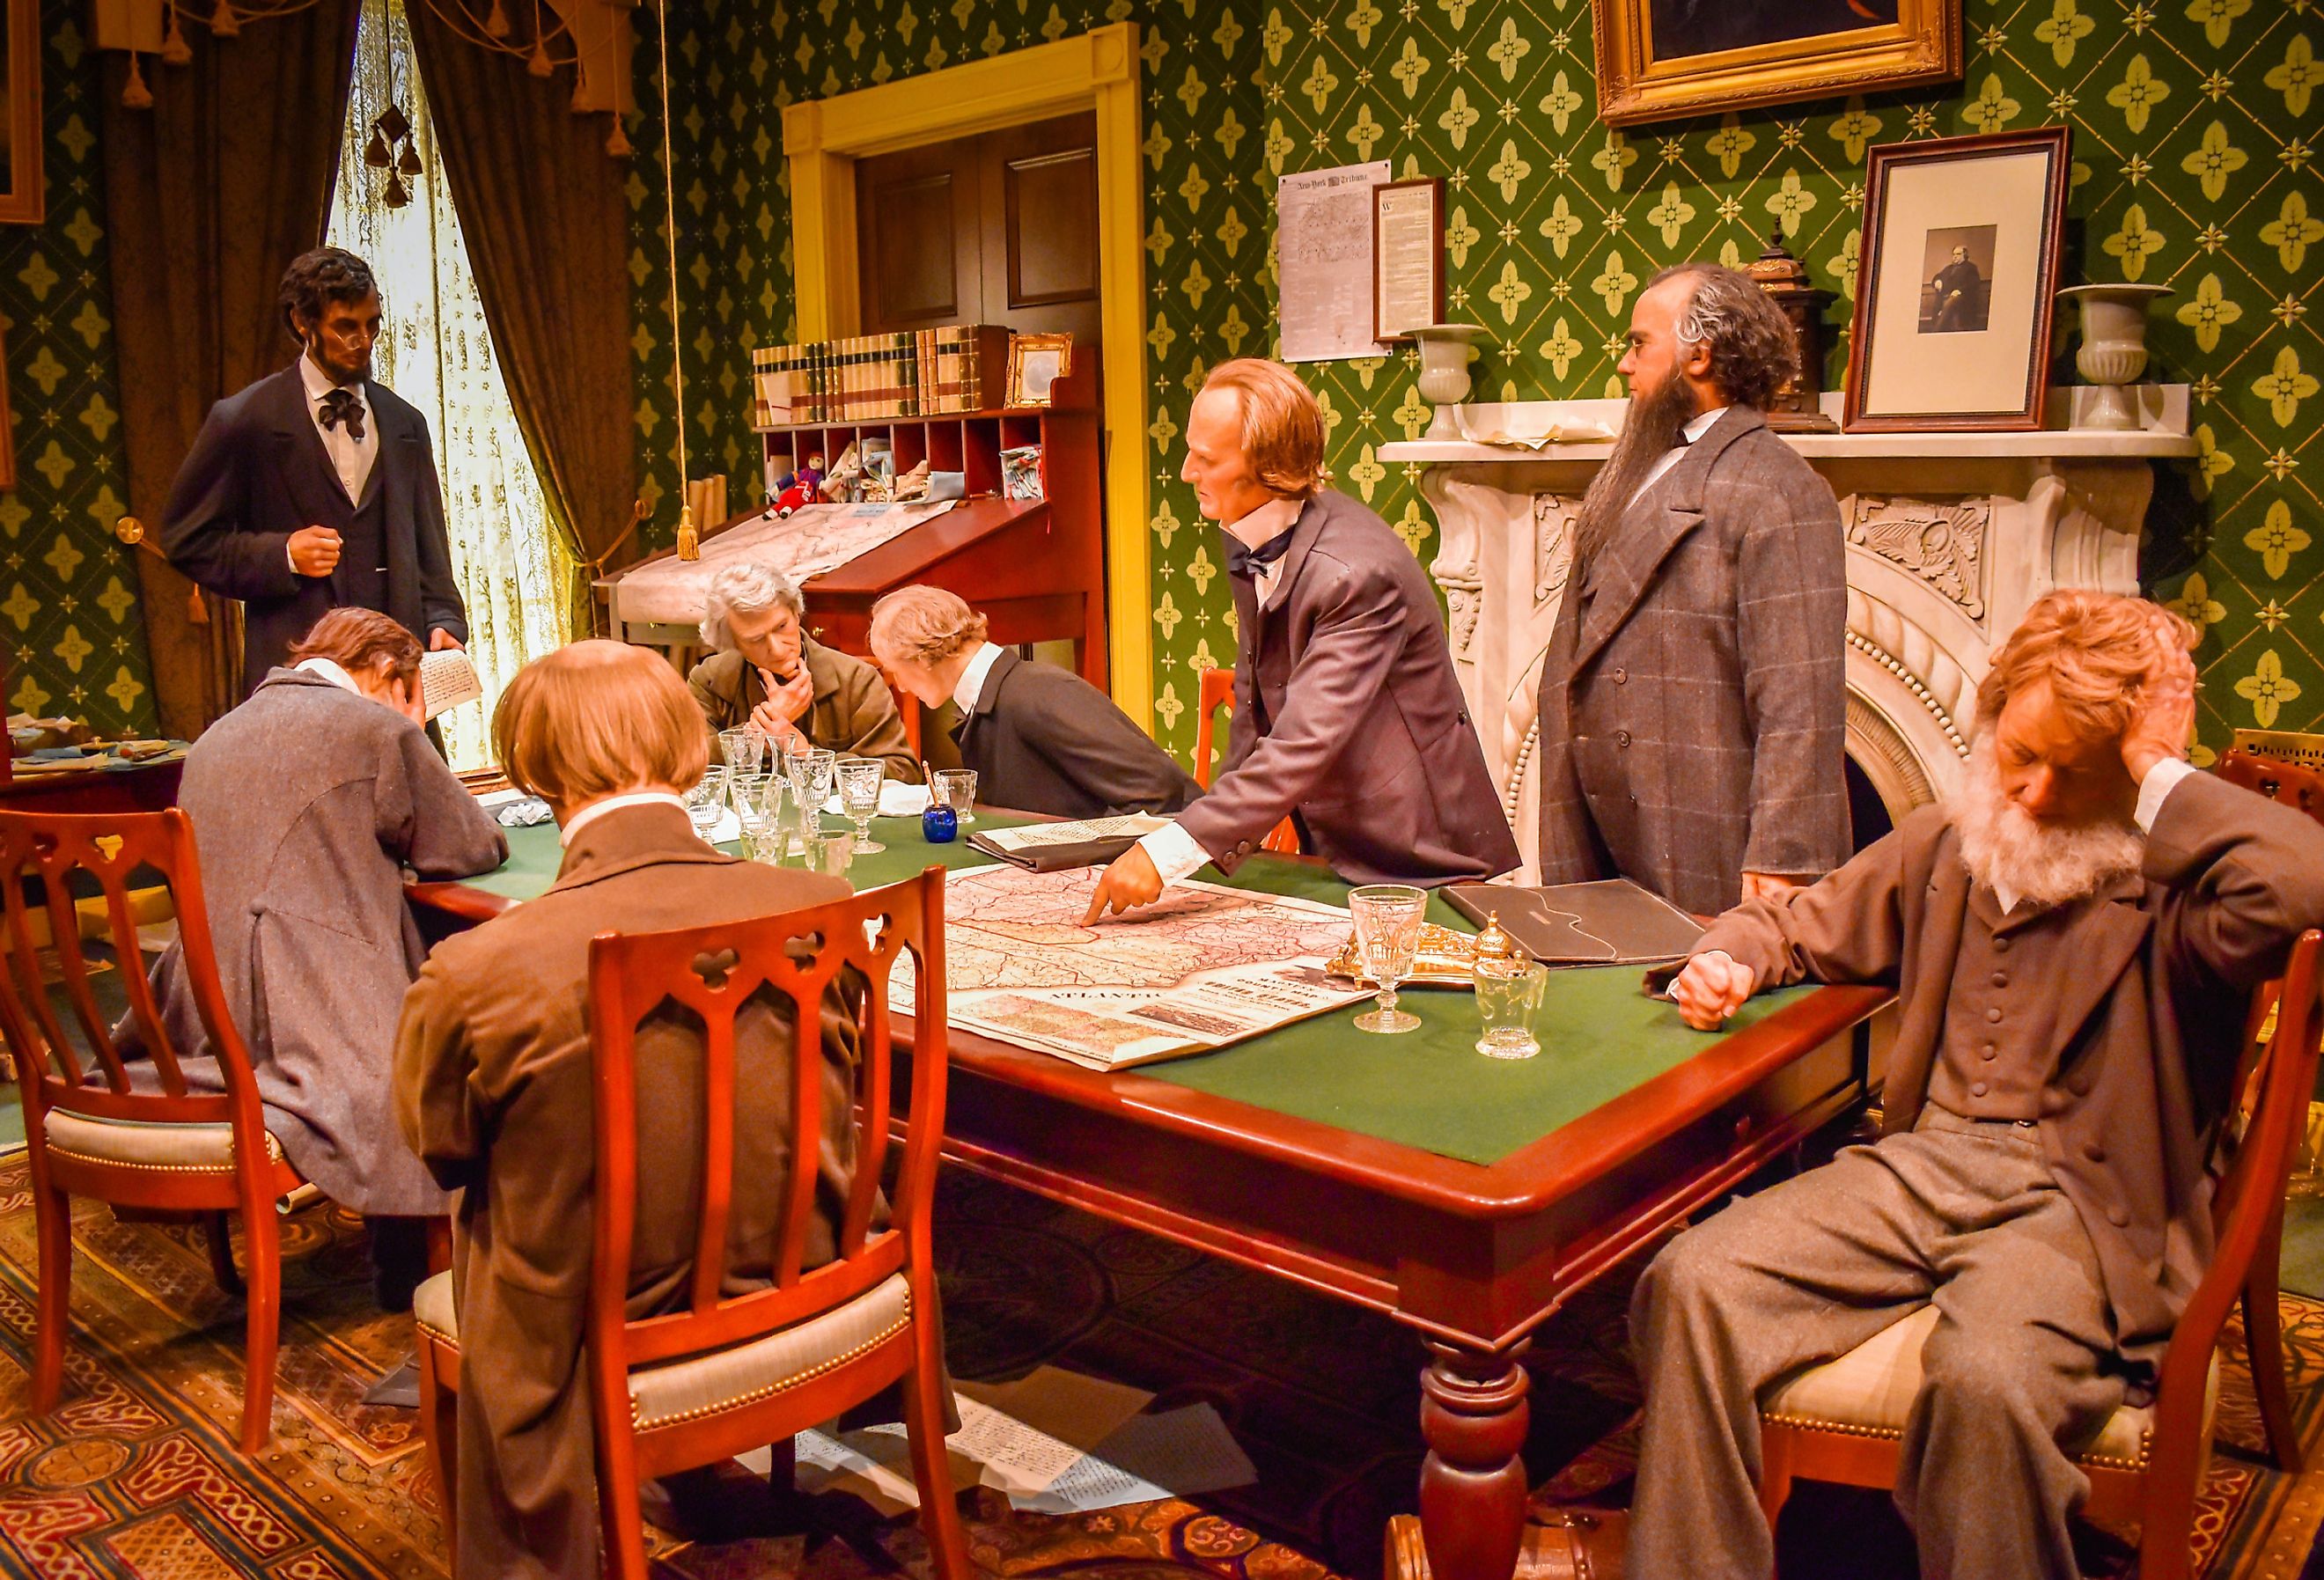 A depiction of President Abraham Lincoln convening his Cabinet to share his draft of the Emancipation Proclamation. Image credit Brett Welcher via Shutterstock